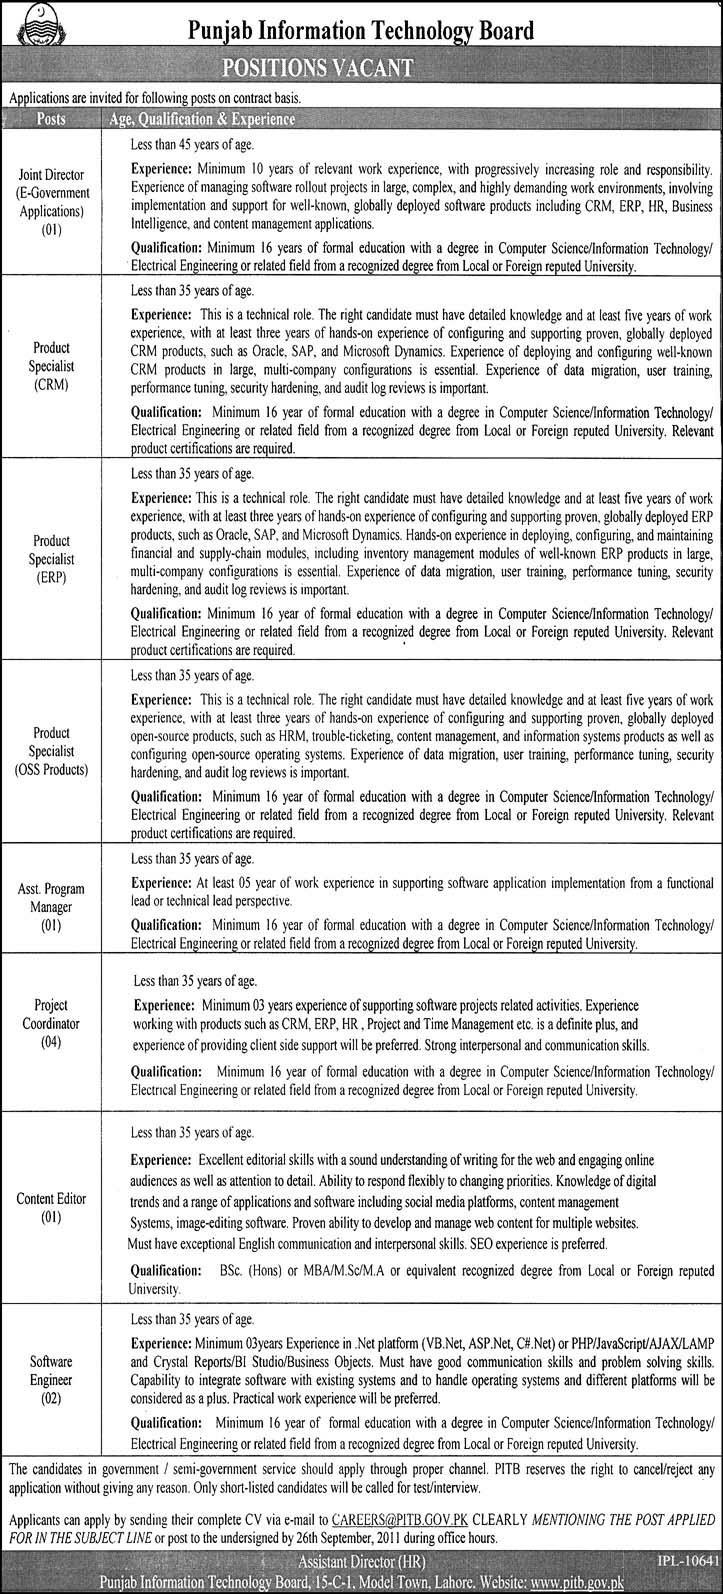 Position Vacant in Punjab Information Technology Board